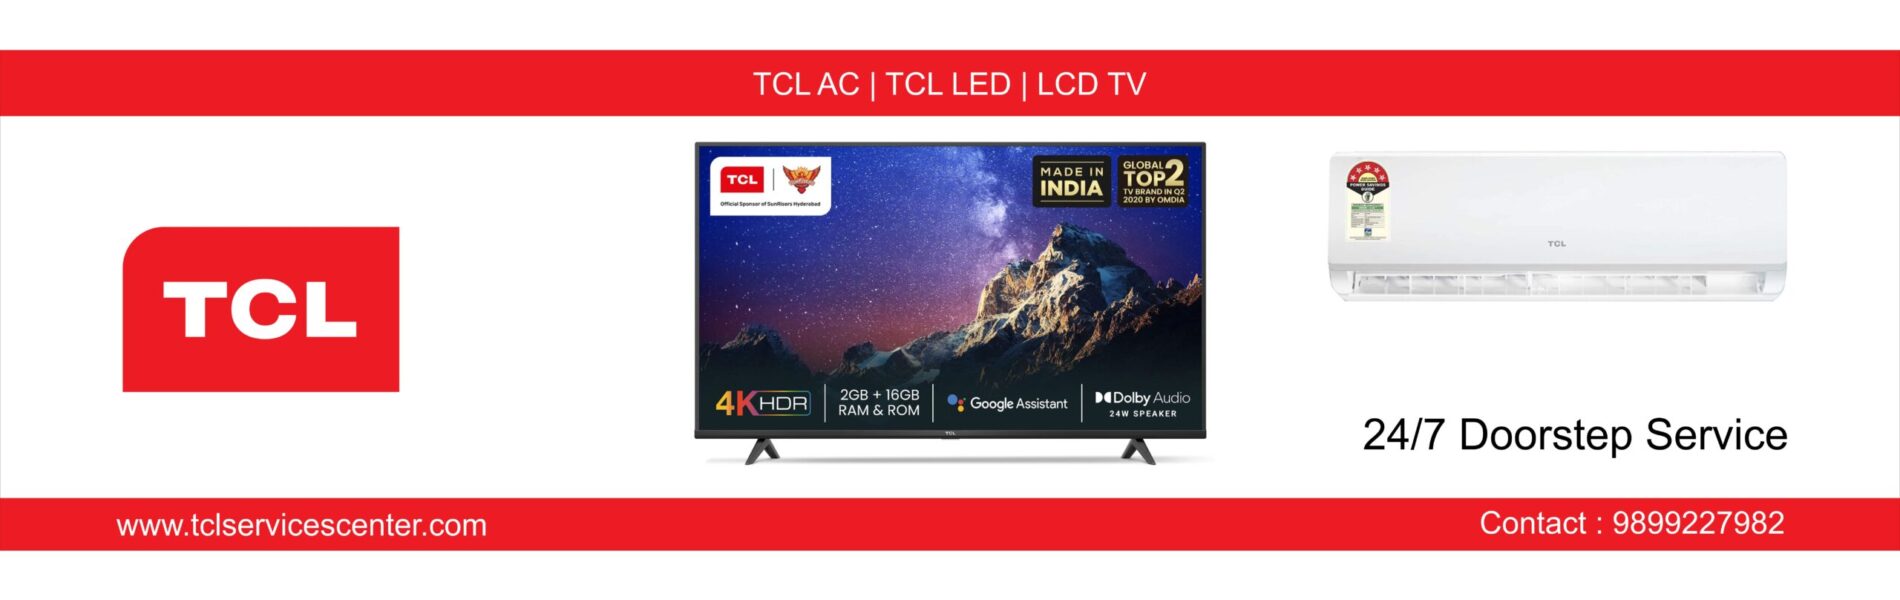 TCL service center in Noida